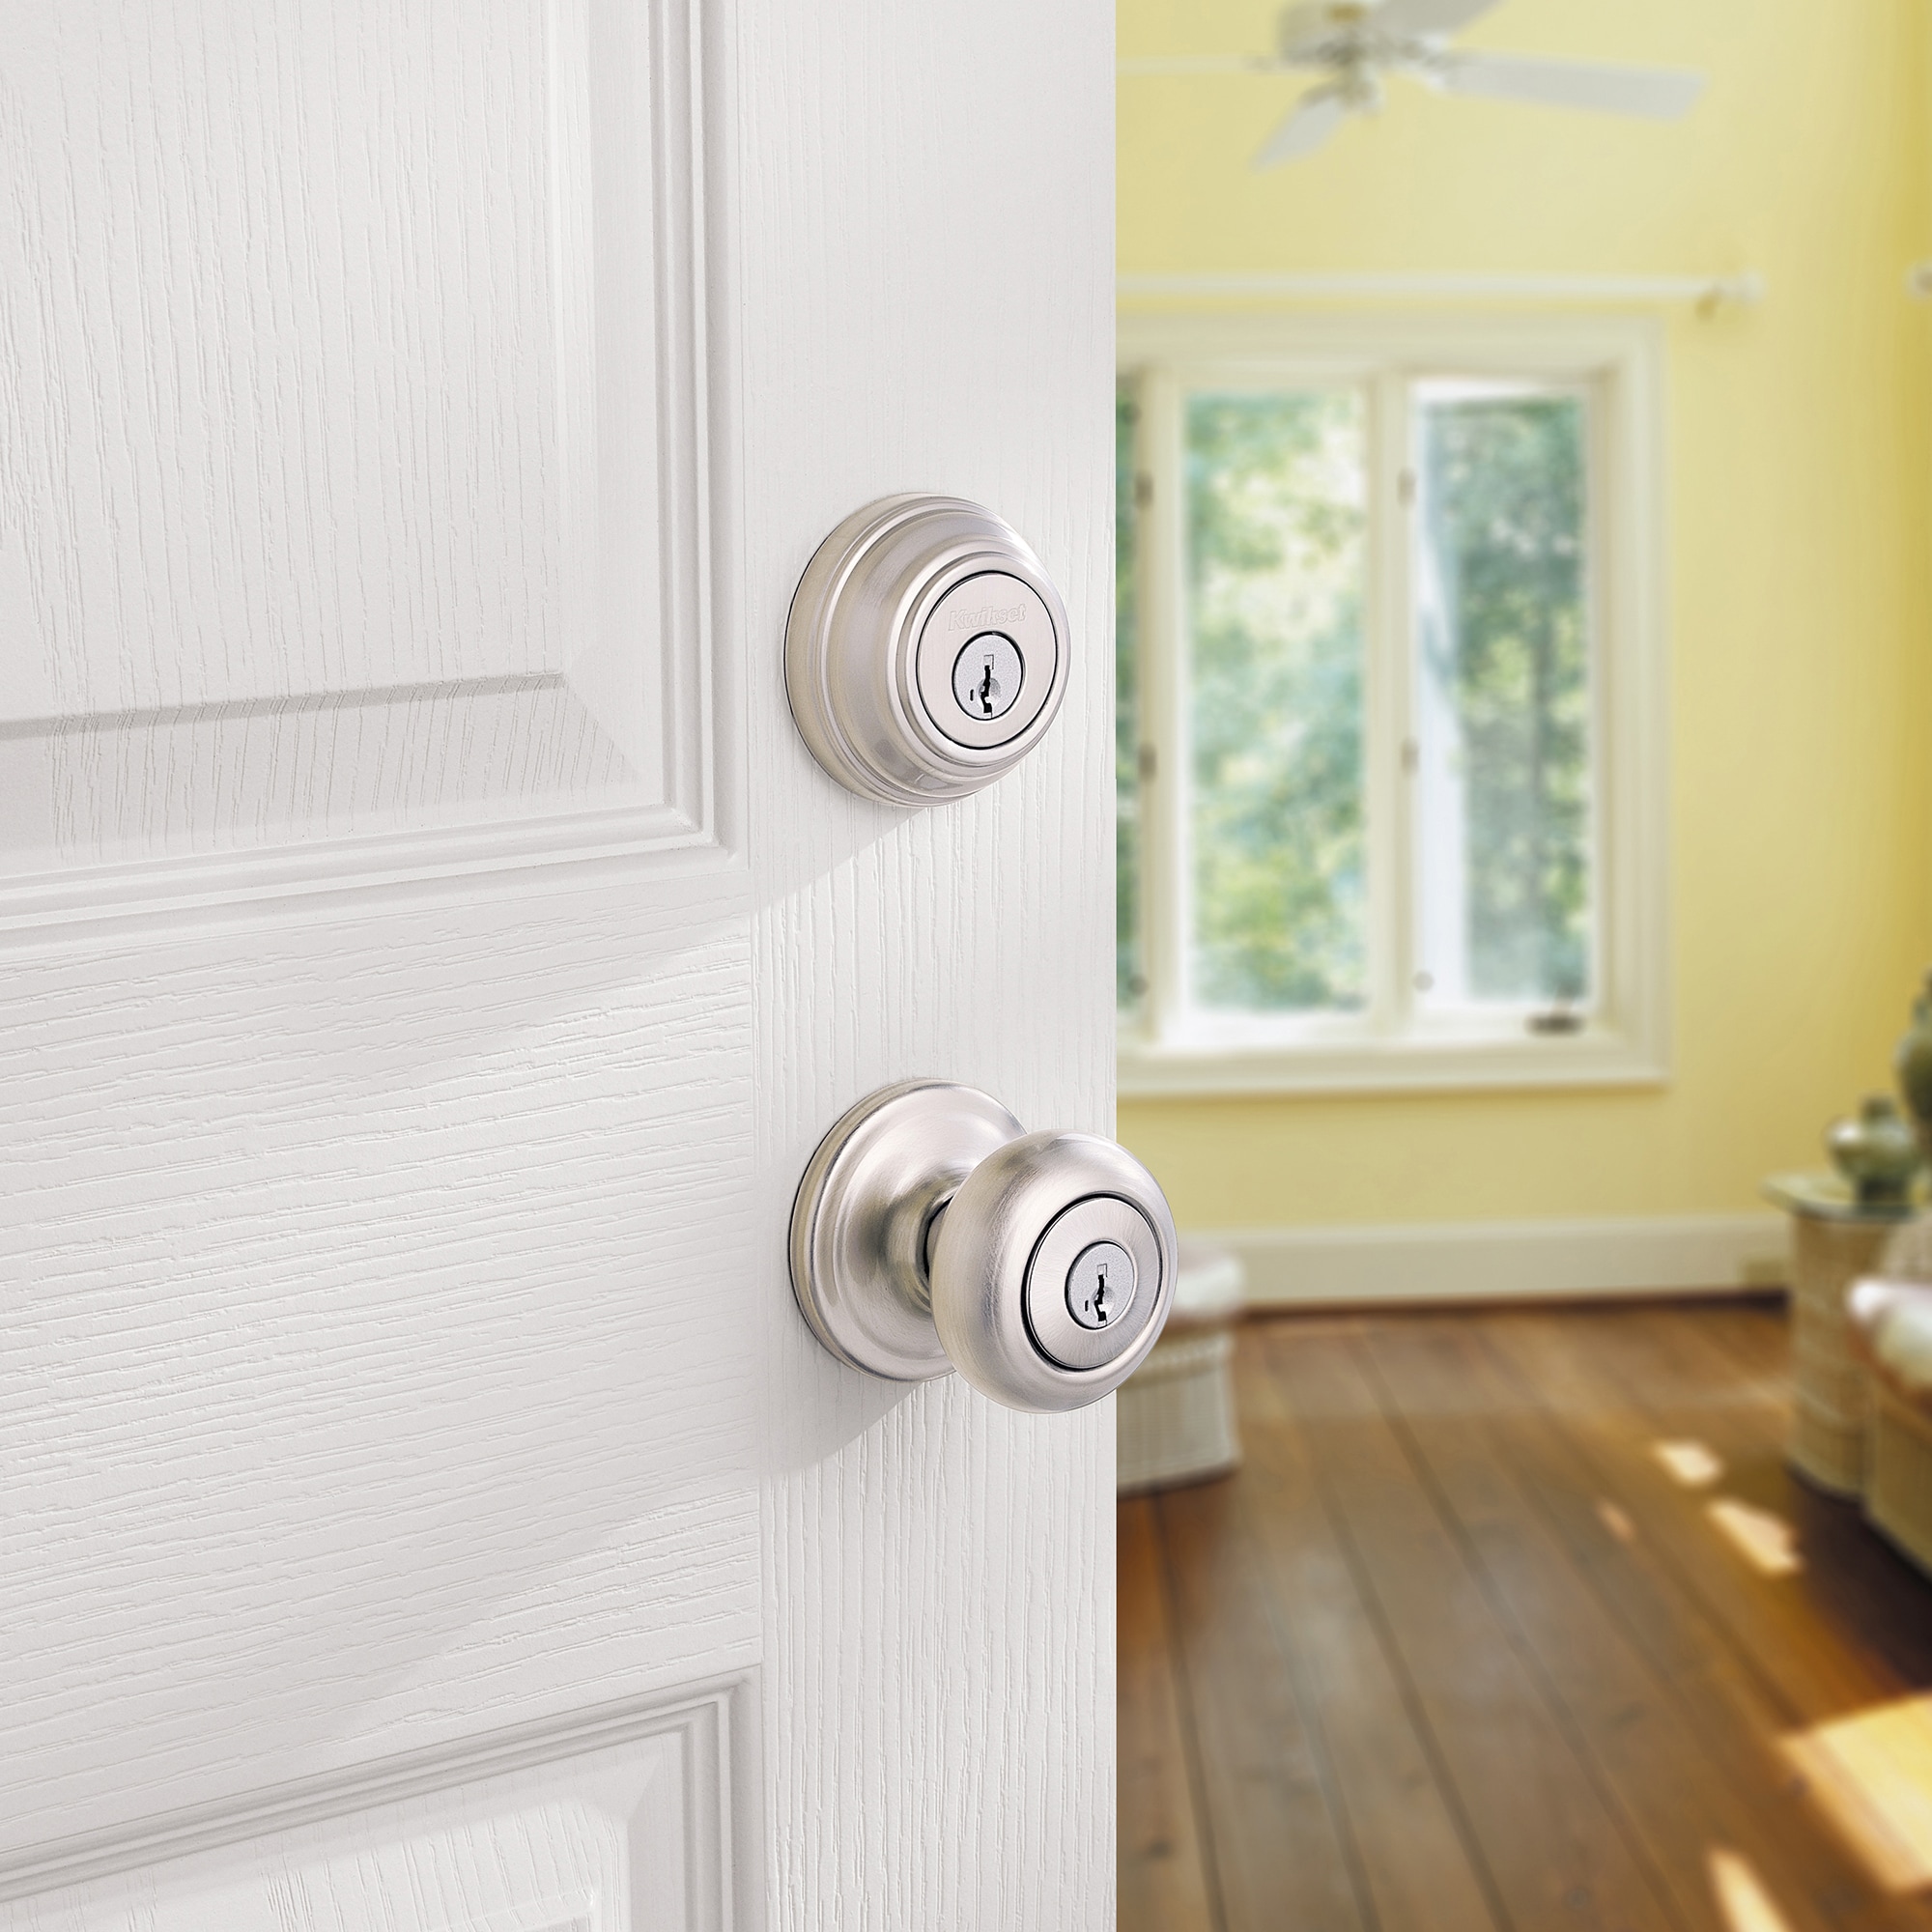 Kwikset Juno Satin Nickel Exterior Entry Door Knob and Single Cylinder  Deadbolt Combo Pack Featuring SmartKey Security 99910-034 - The Home Depot